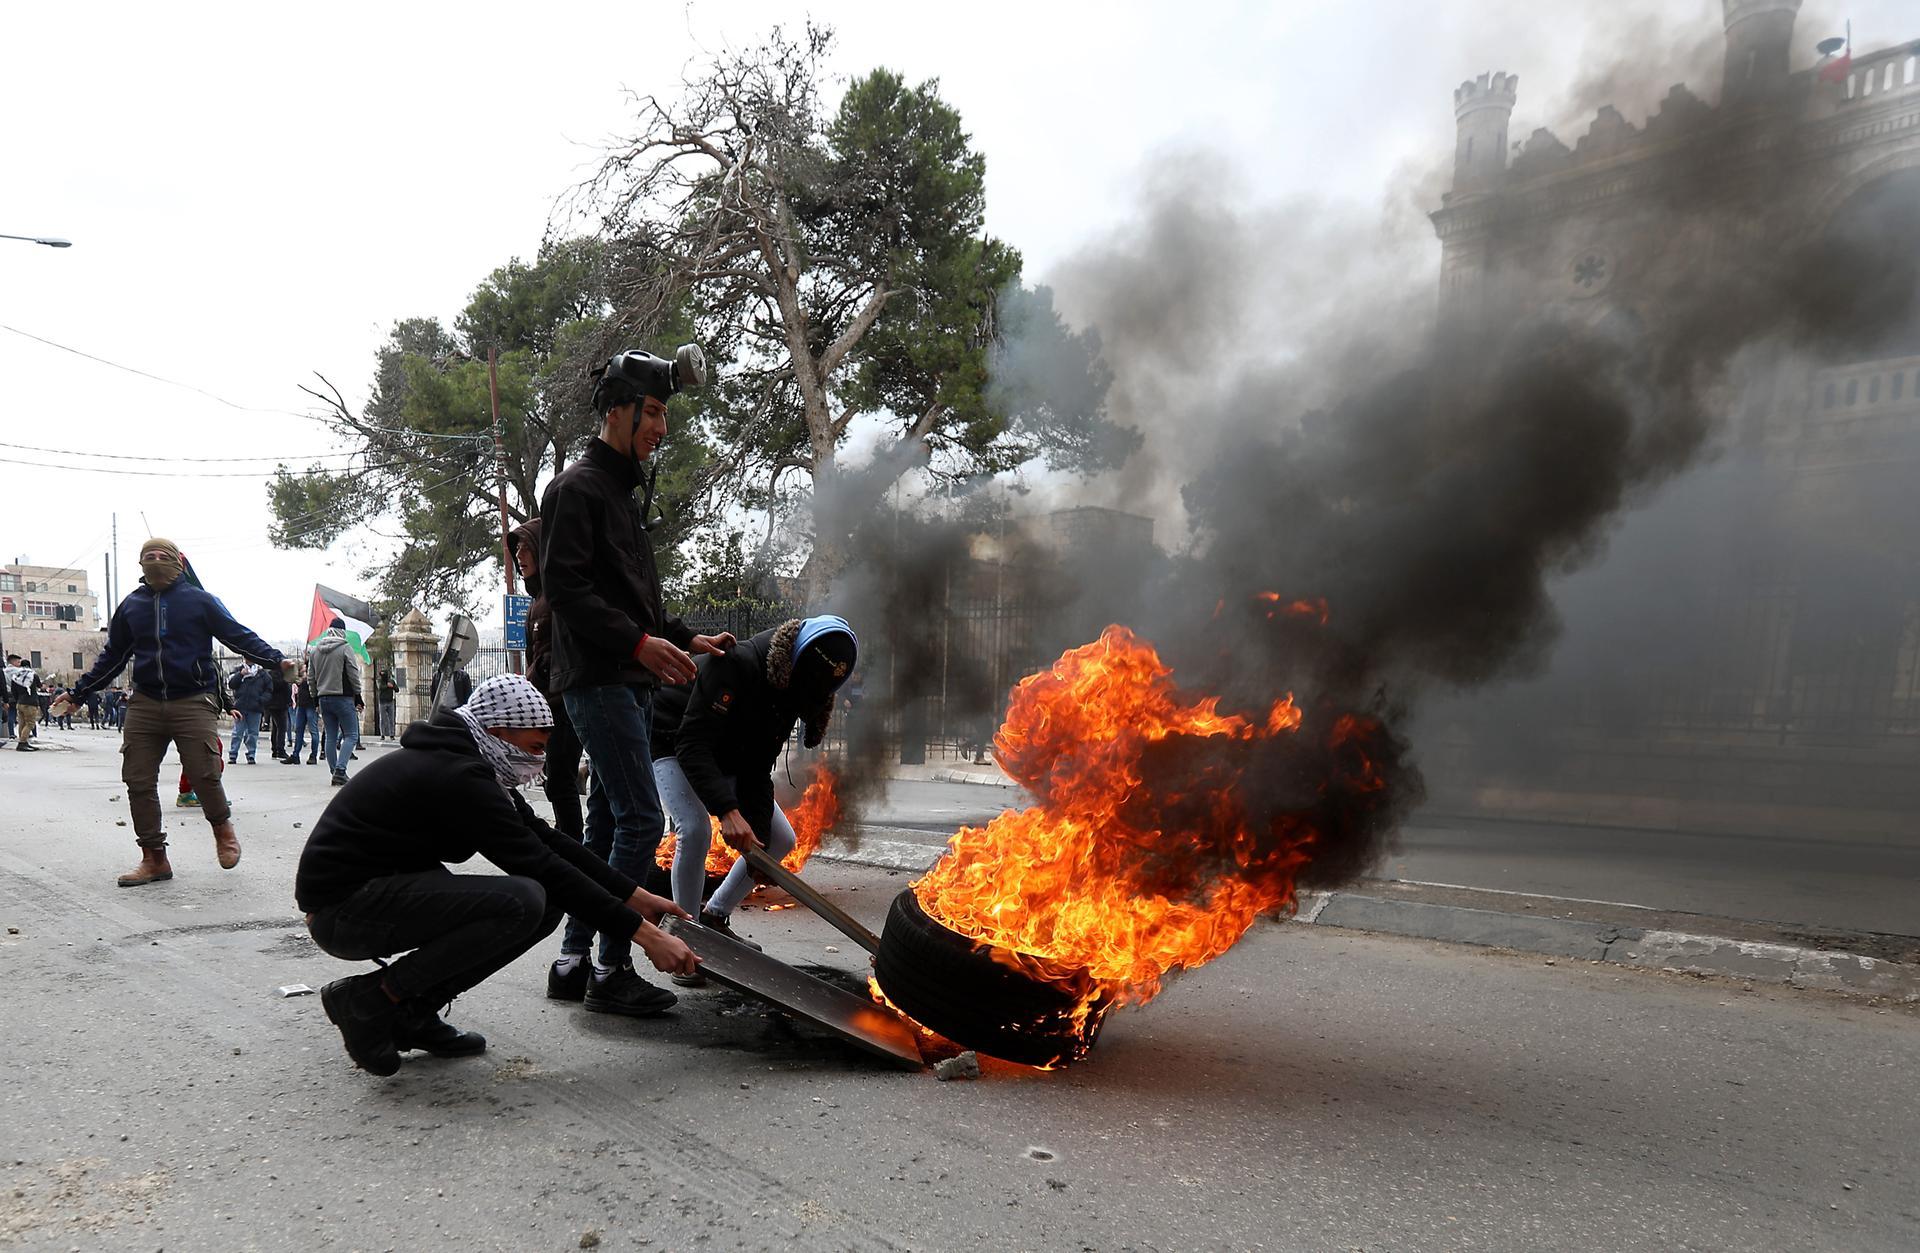 Palestinians clash with Israeli security forces following a protest in the West Bank city of Bethlehem, 29 January 2020. EPA